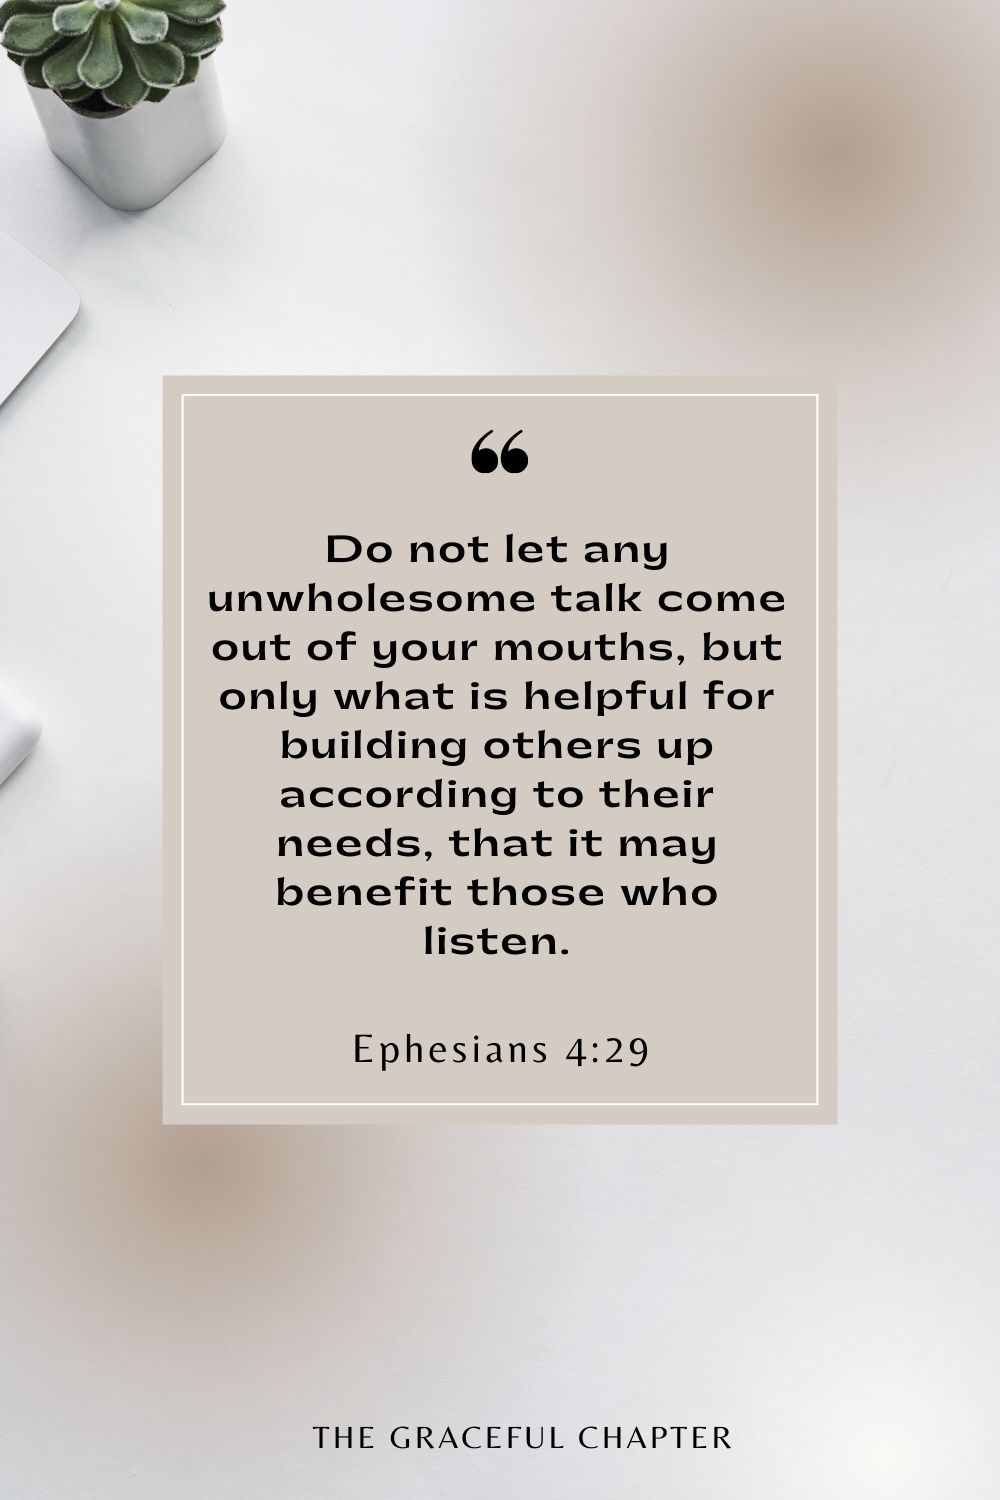 Do not let any unwholesome talk come out of your mouths, but only what is helpful for building others up according to their needs, that it may benefit those who listen. Ephesians 4:29